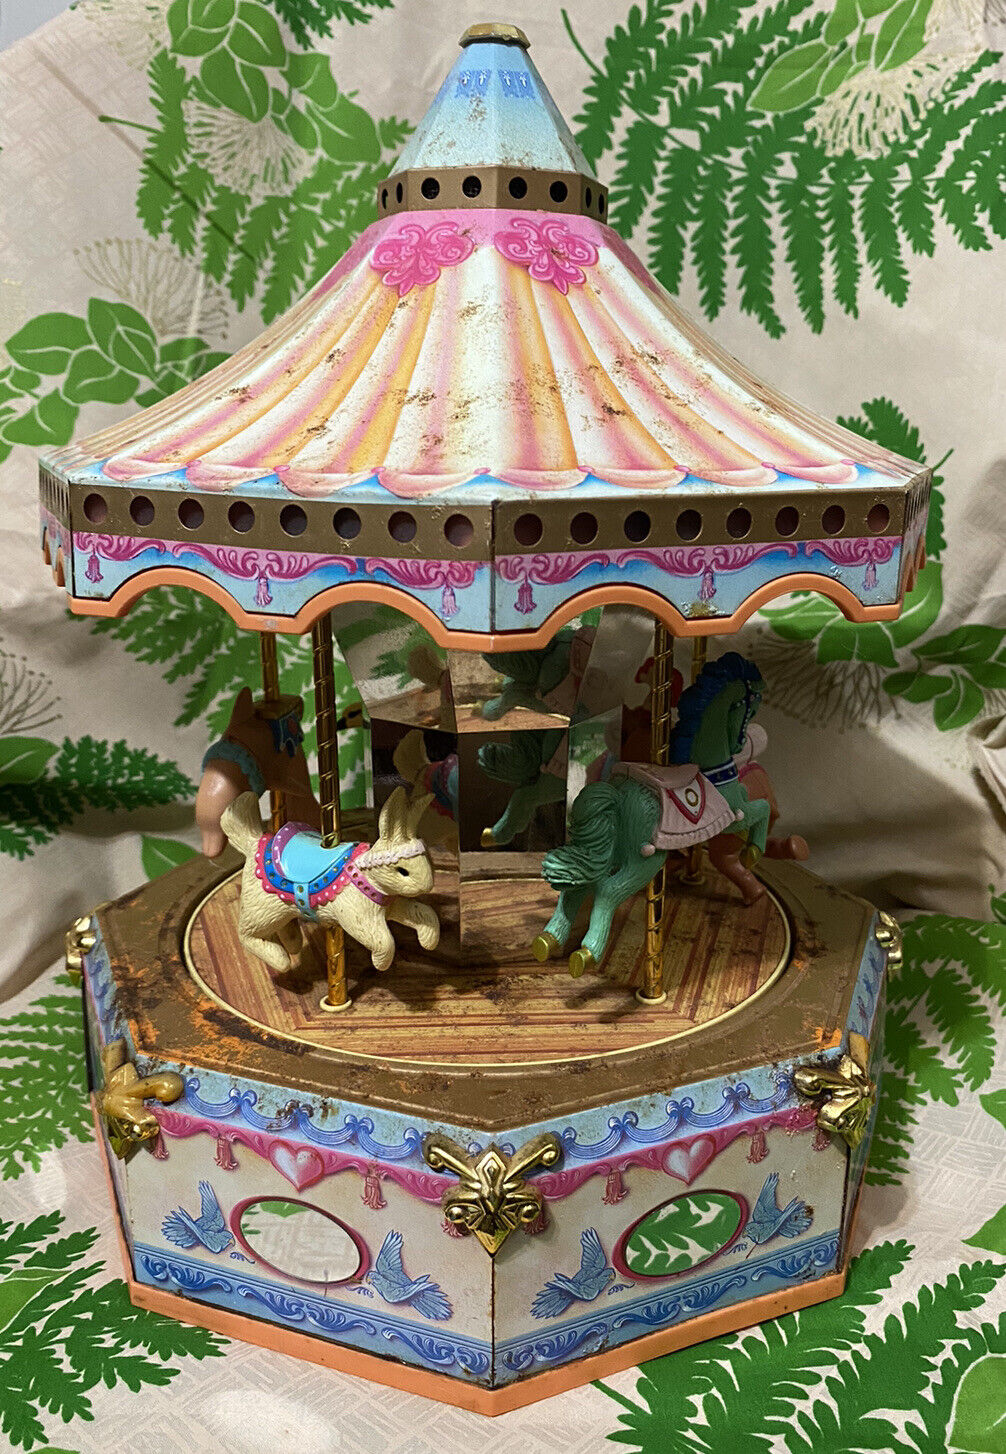 1988 Vintage Sensations Heartline Tin Music Merry-Go-Round Carousel Rust As Is